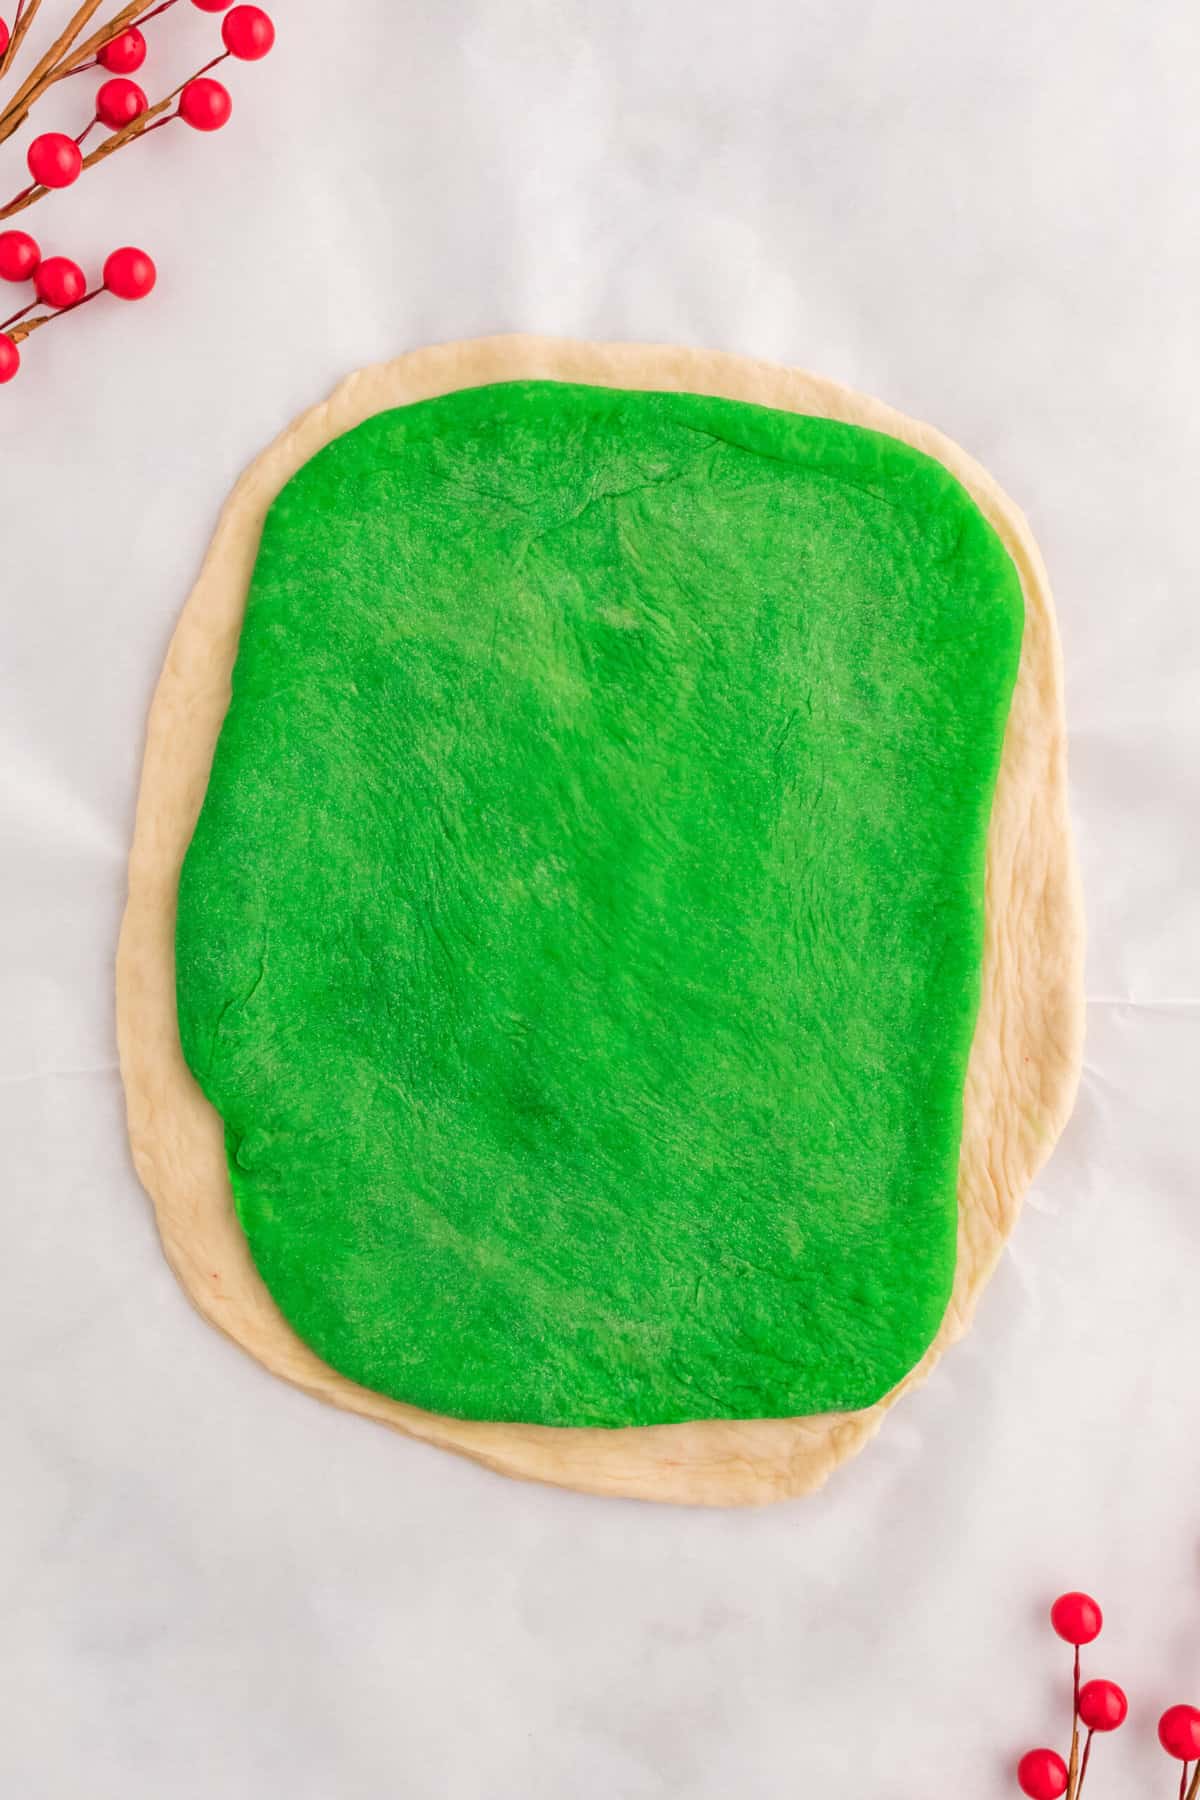 the white dough with the green on top